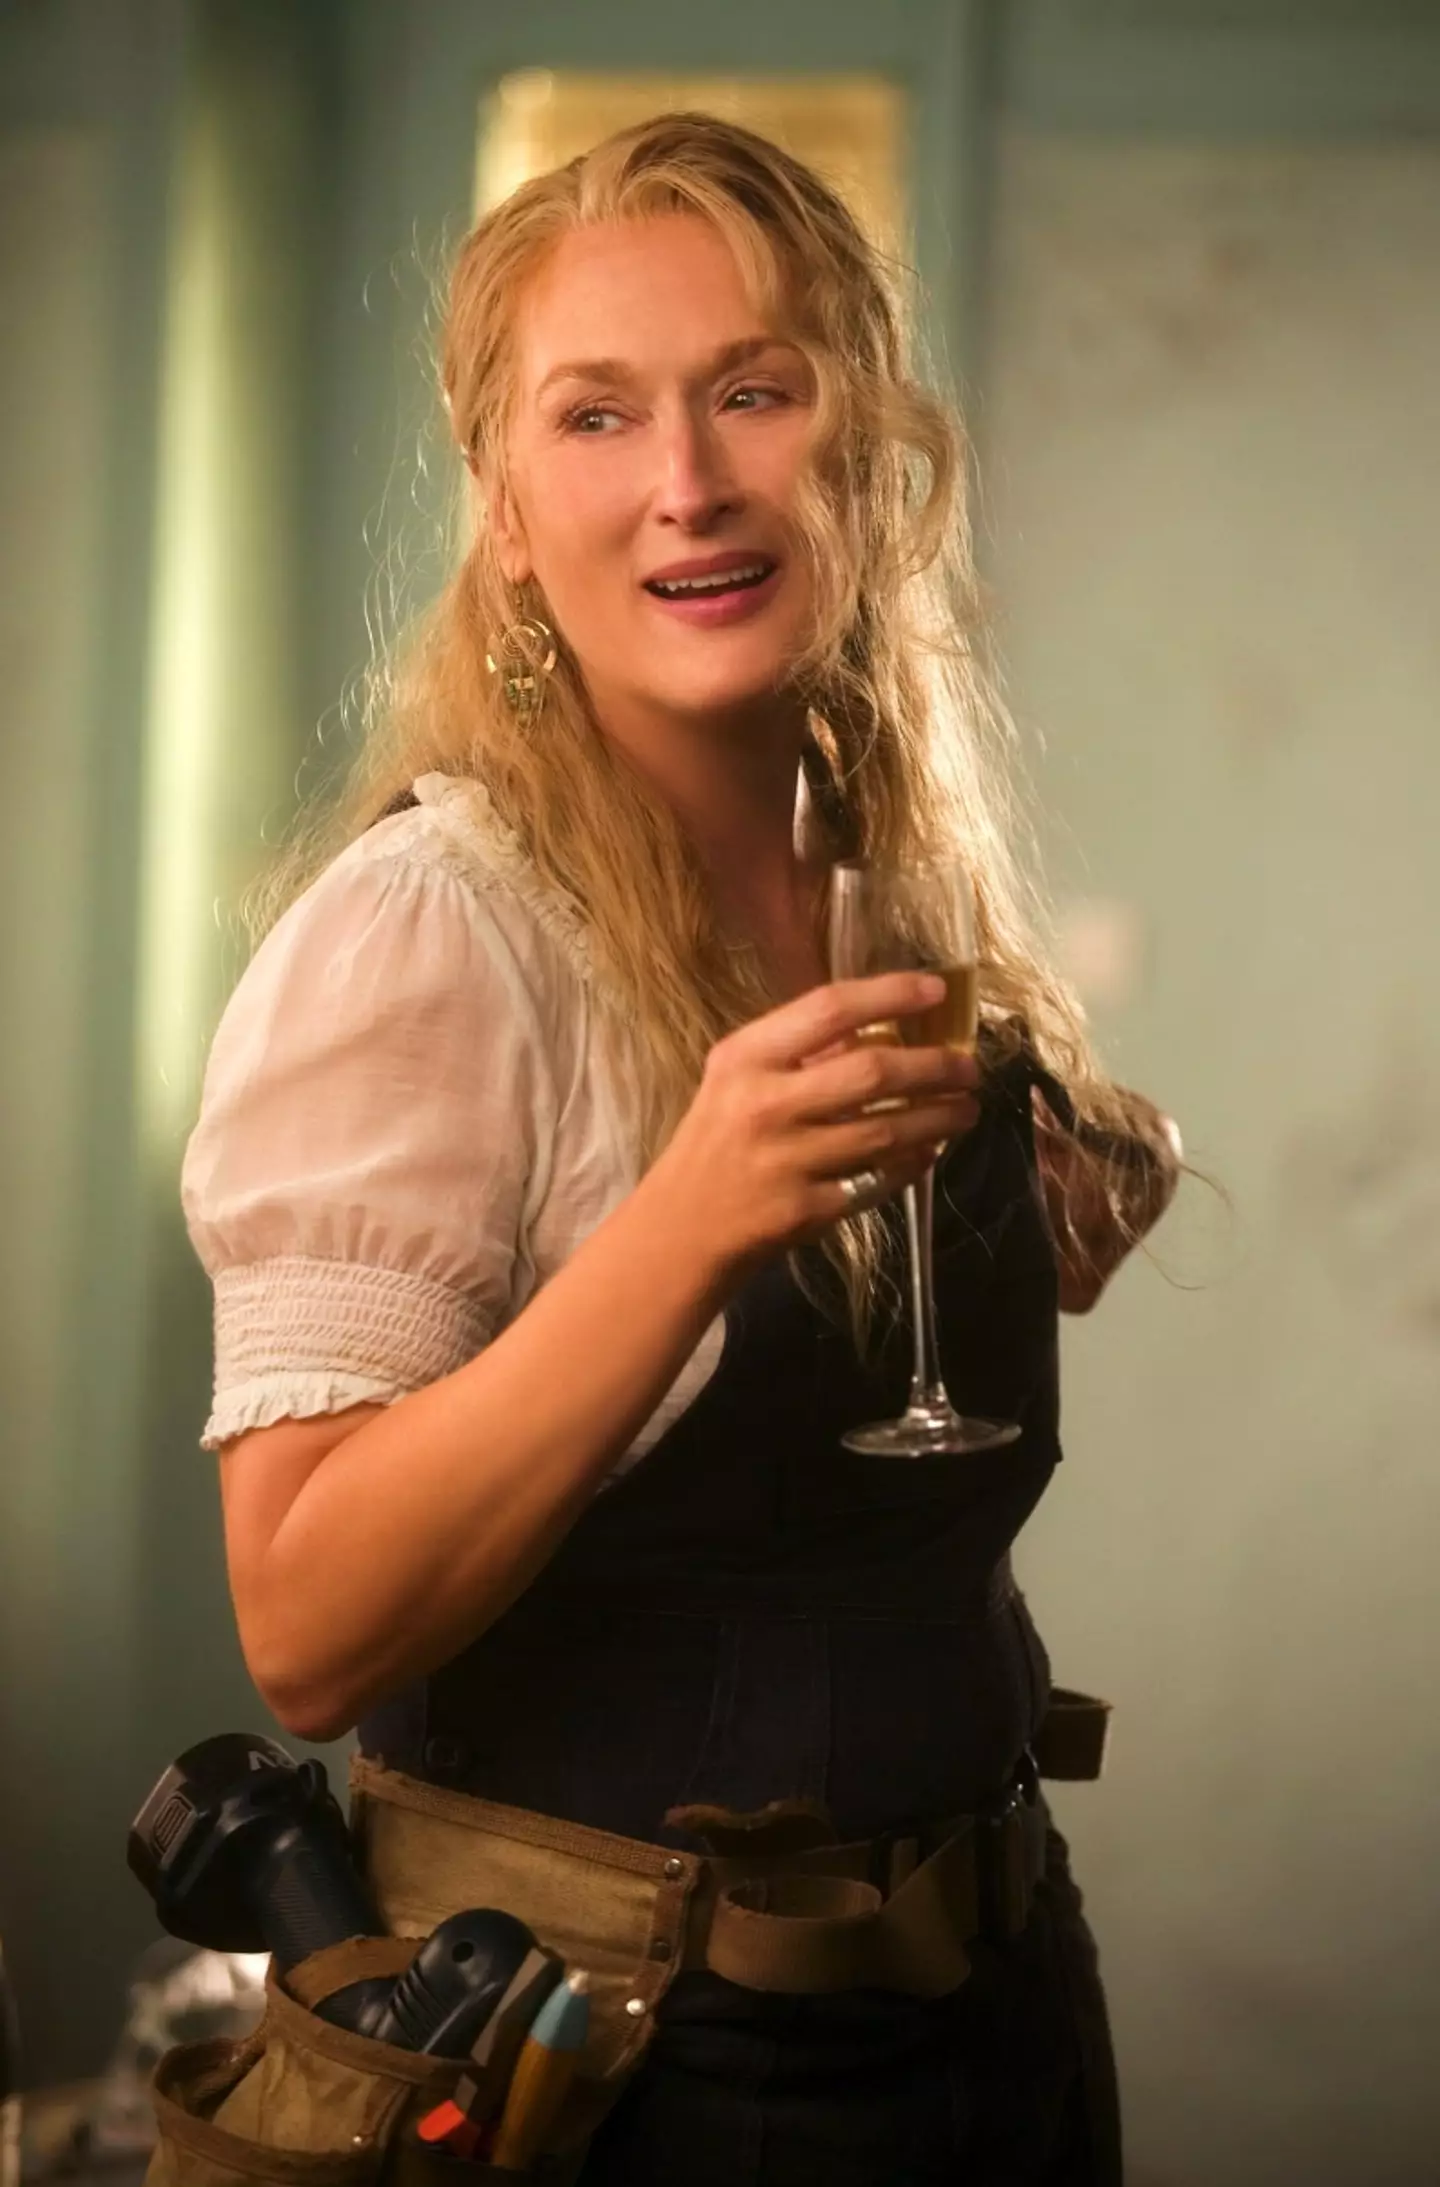 Could we see the iconic Meryl Streep resume her role as Donna in the third movie?